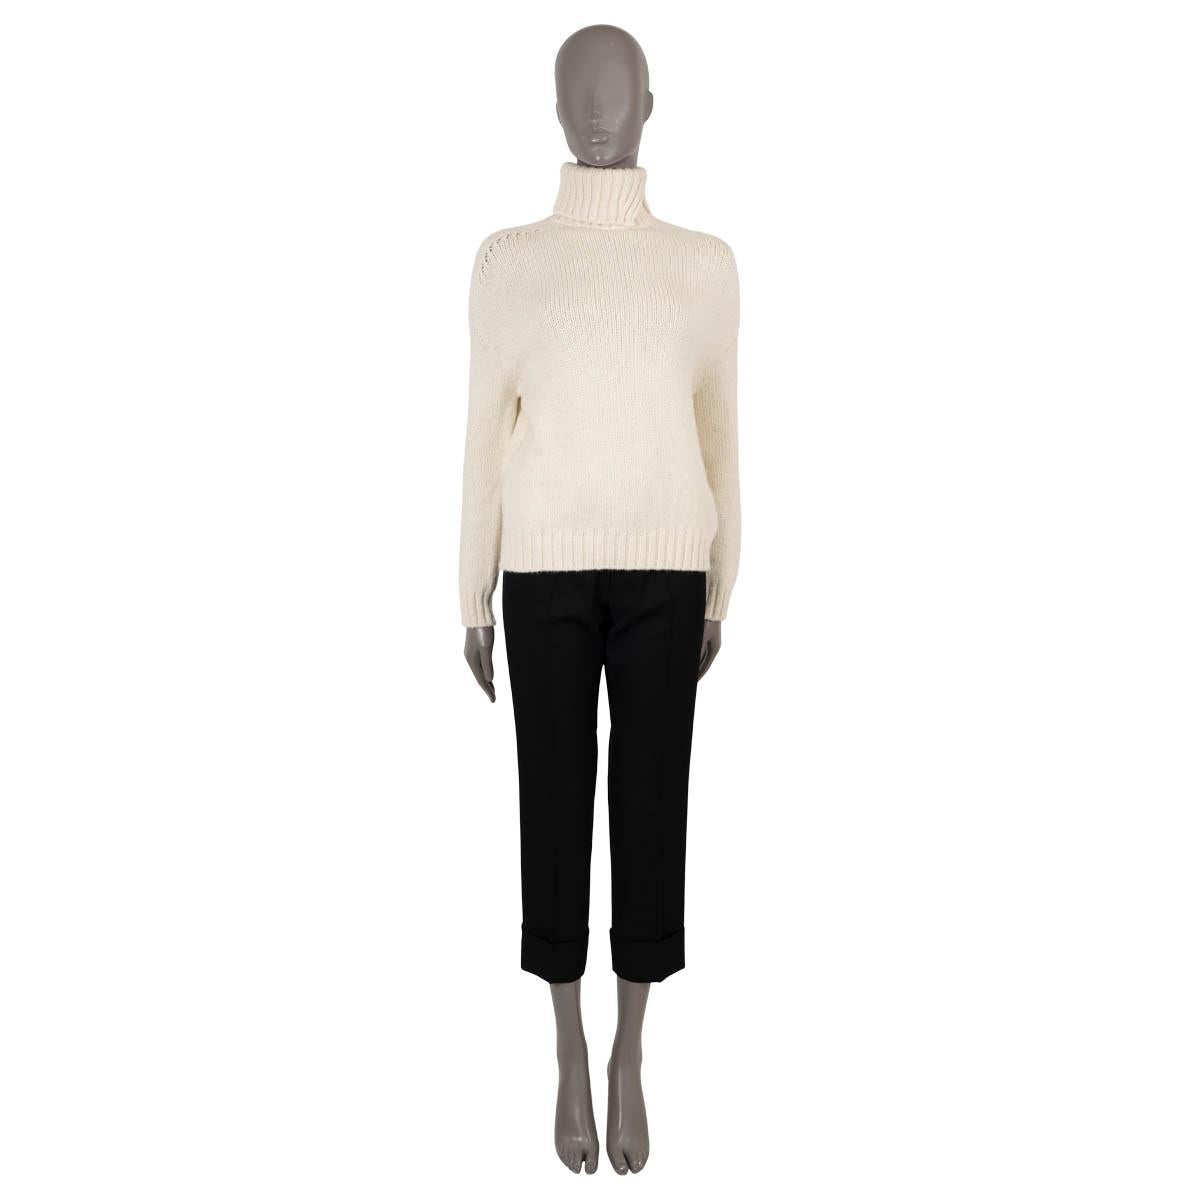 100% authentic Loro Piana turtleneck sweater in cream cashmere (60%) and polyamide (40%). Features a relaxed, oversize silhouette, dropped shoulders, rib knit turtleneck, cuffs and hen. Unlined. Has been worn and is in excellent